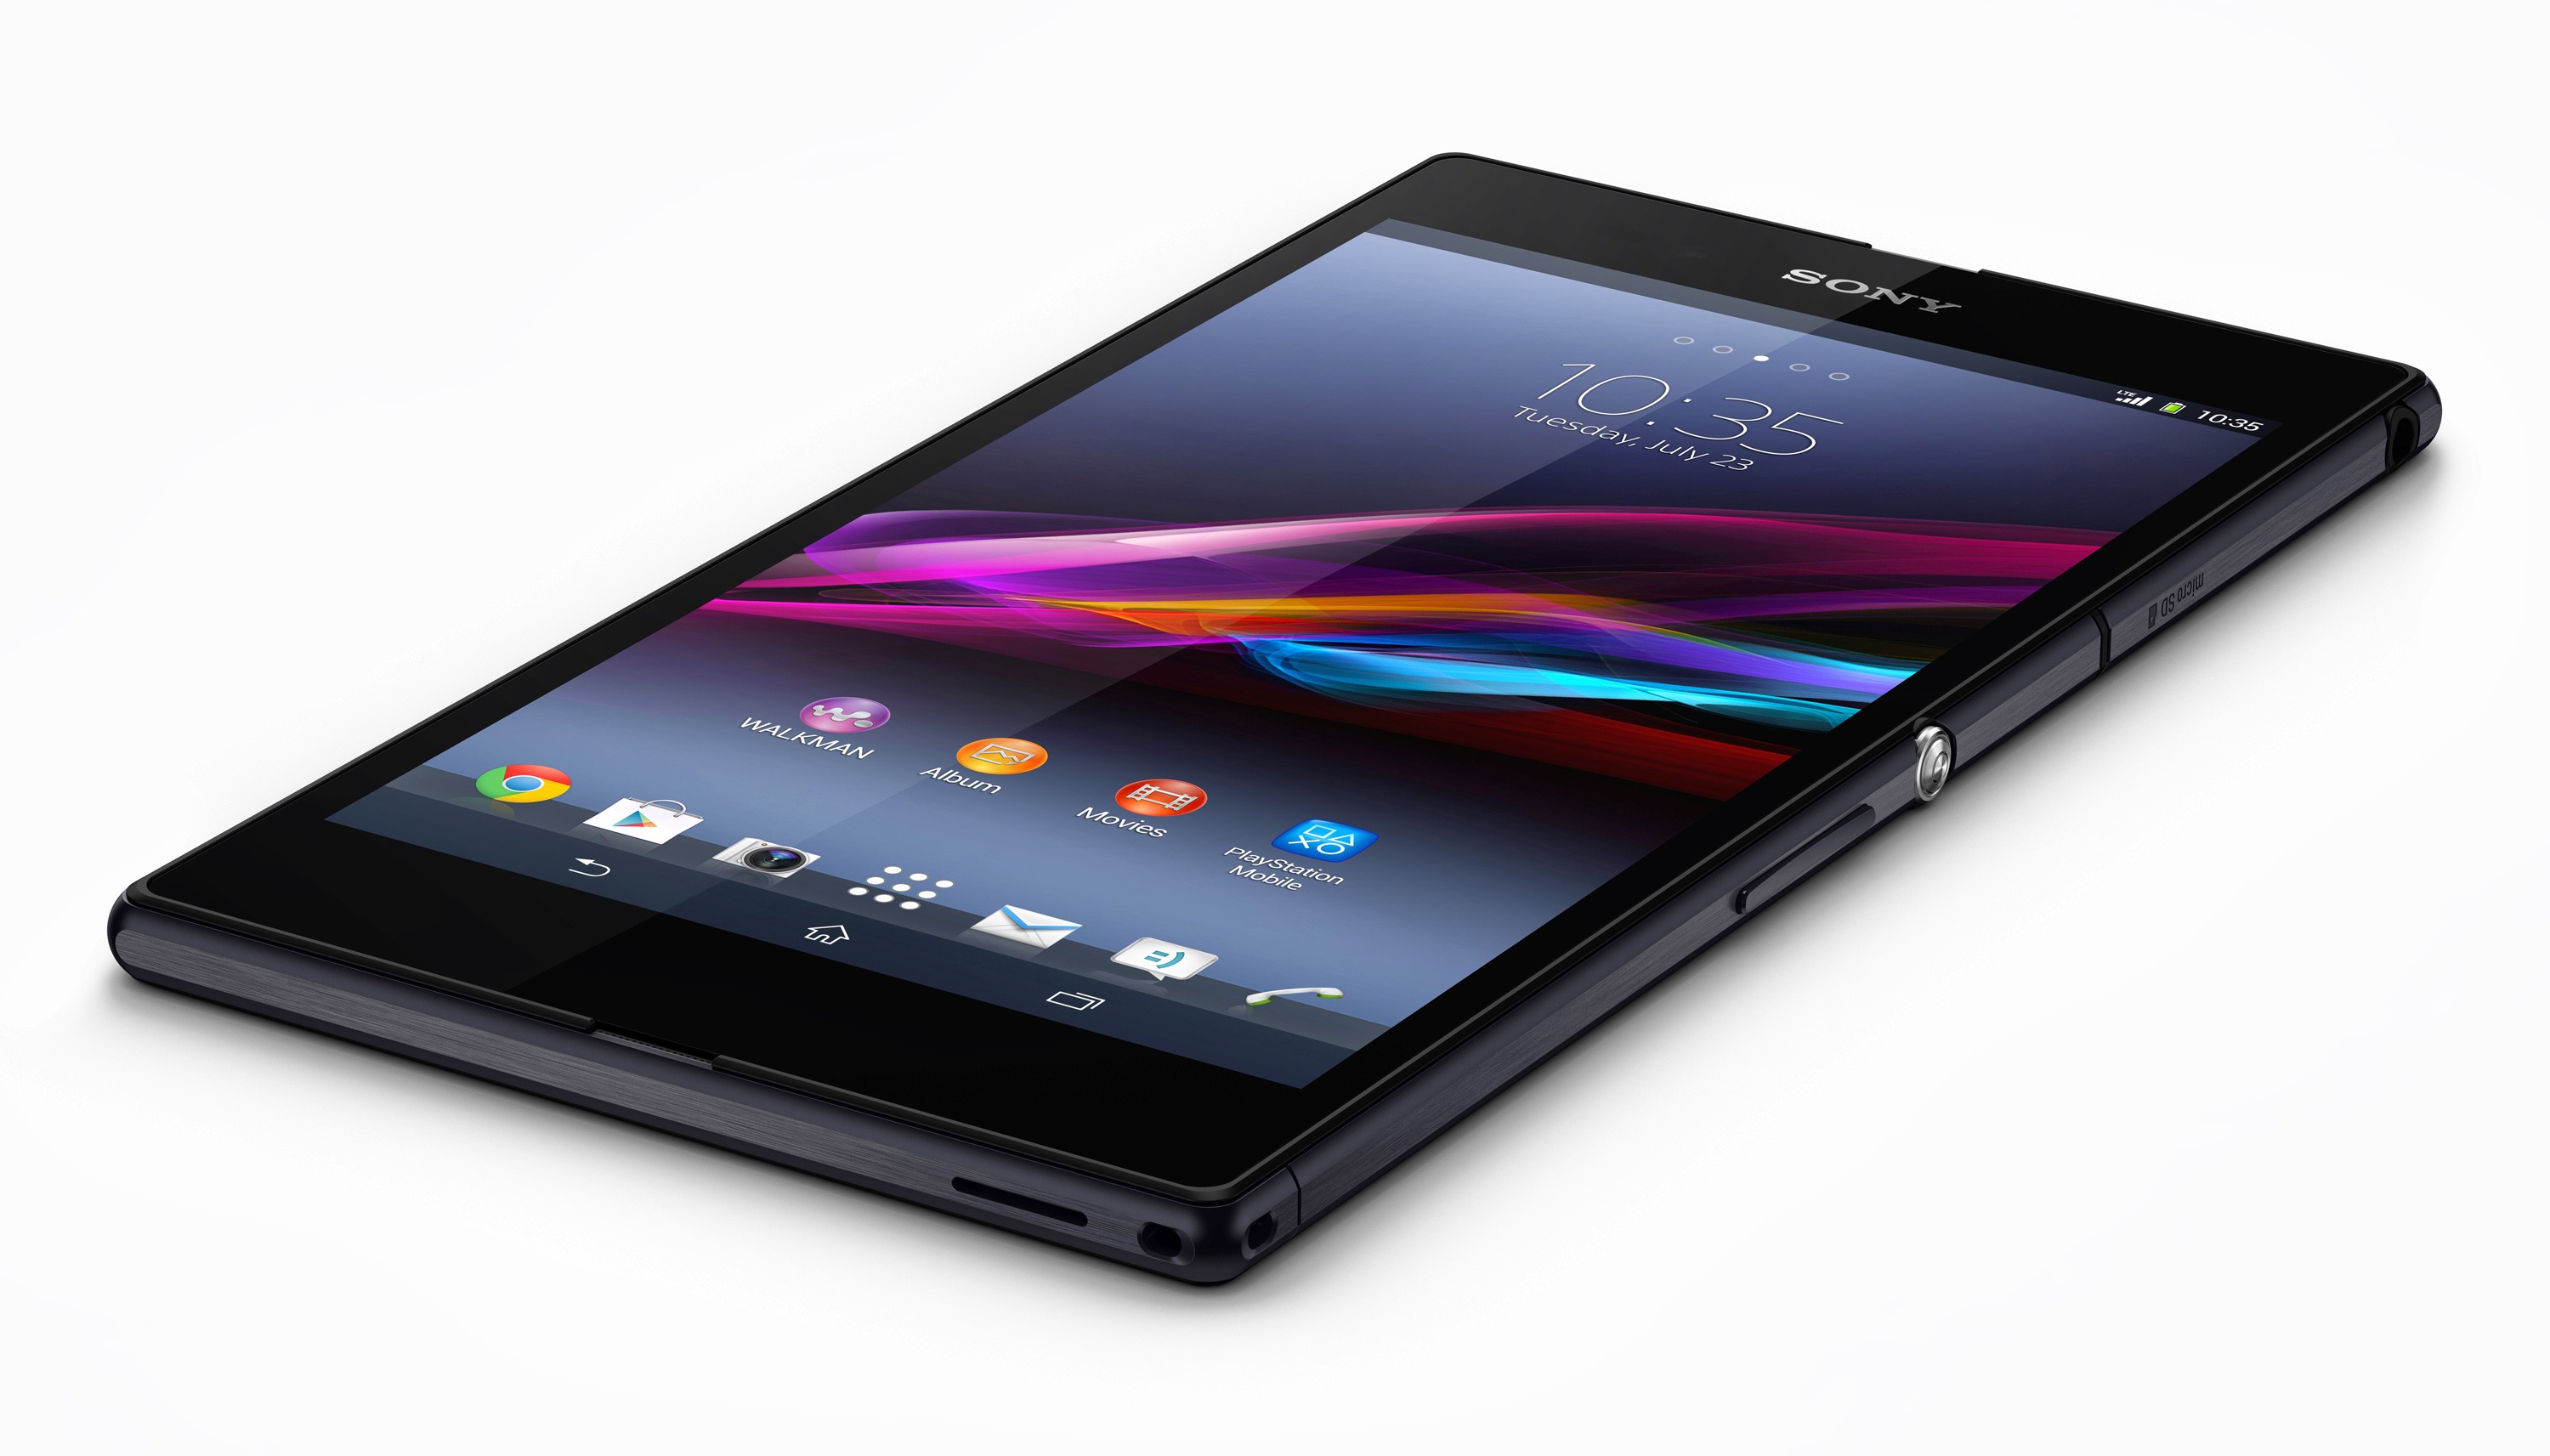 Sony Experia Z Ultra - for some reason we don't have an alt tag here